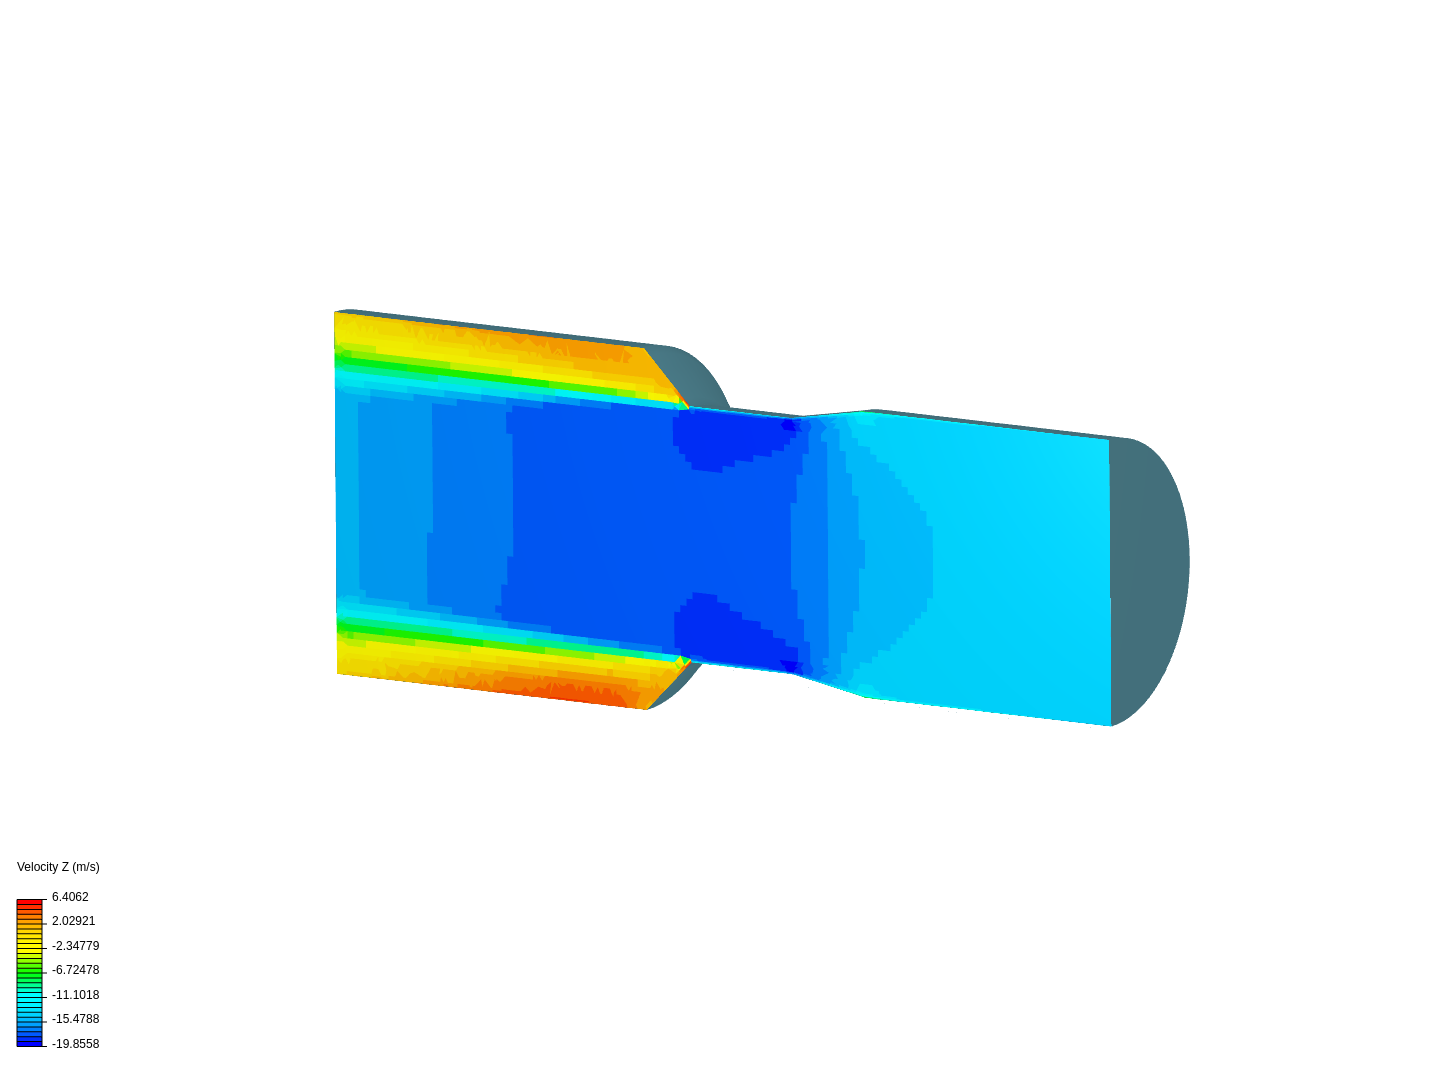 Carburettor CFD analysis first year image